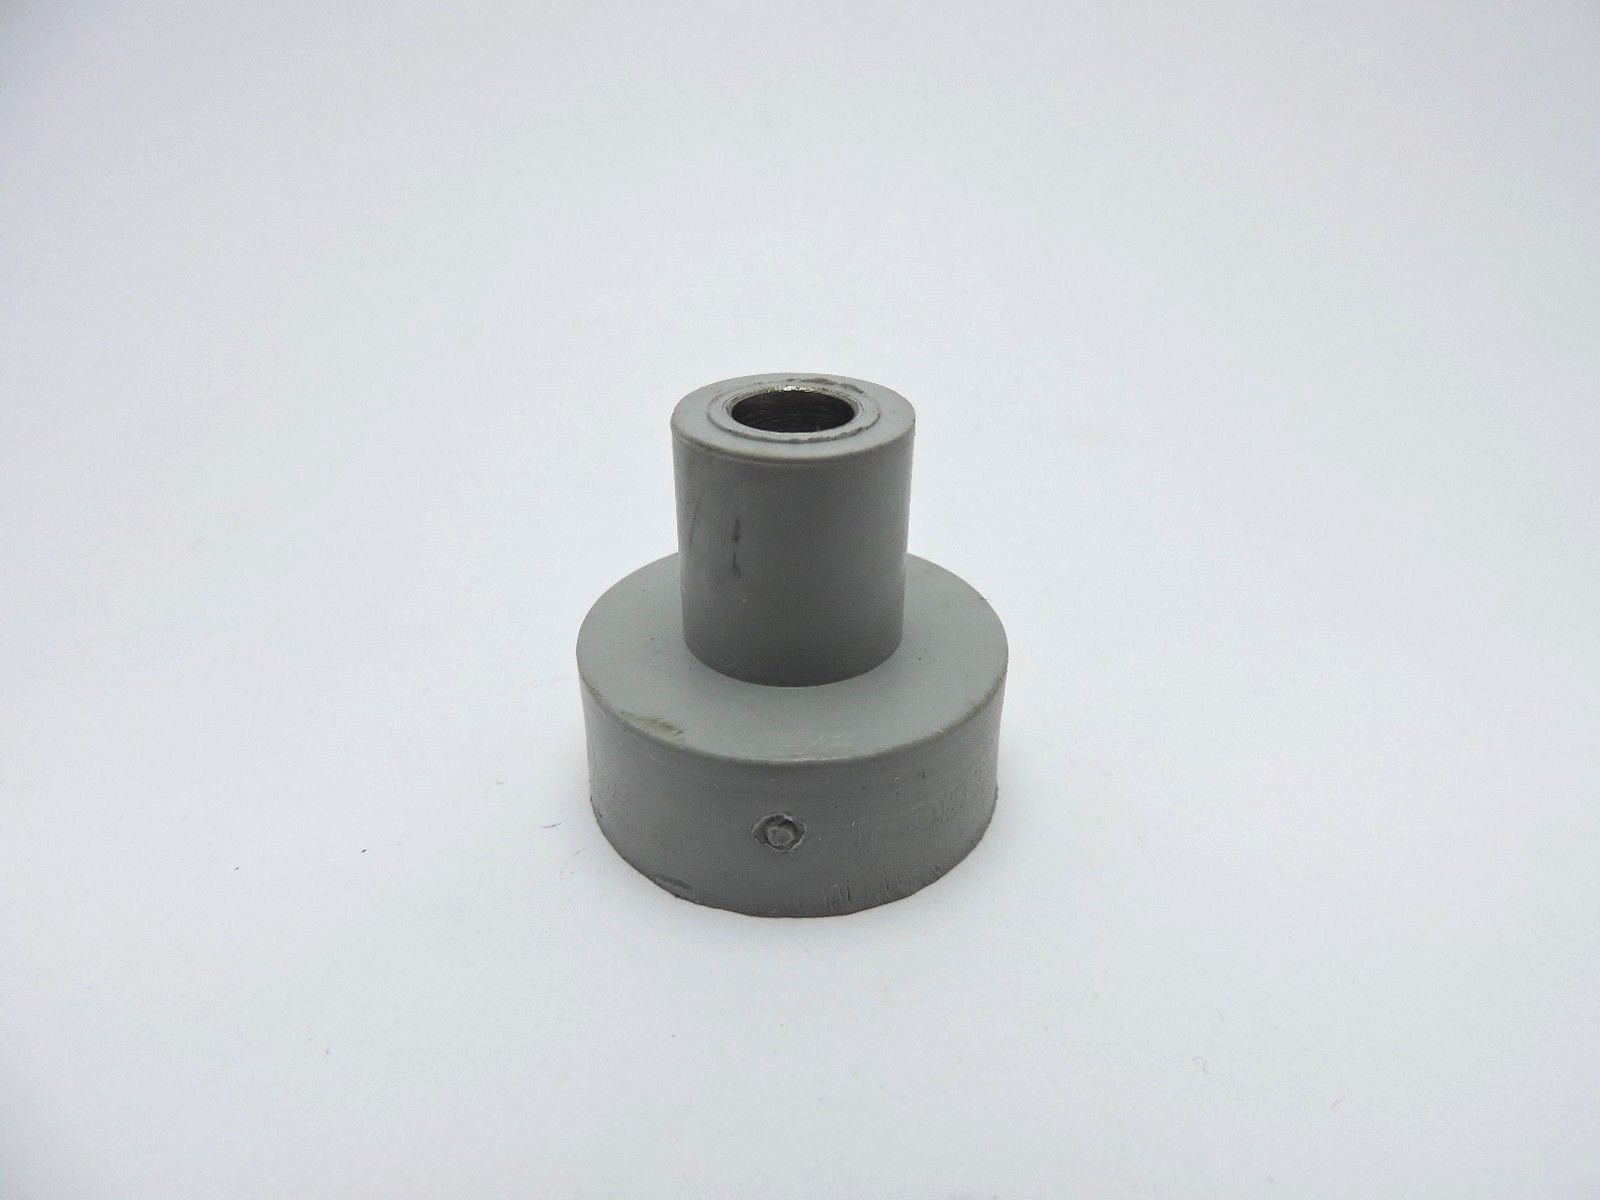 Support Foot - Berkel OEM Part # A3000-1 - Available from City Food Equipment